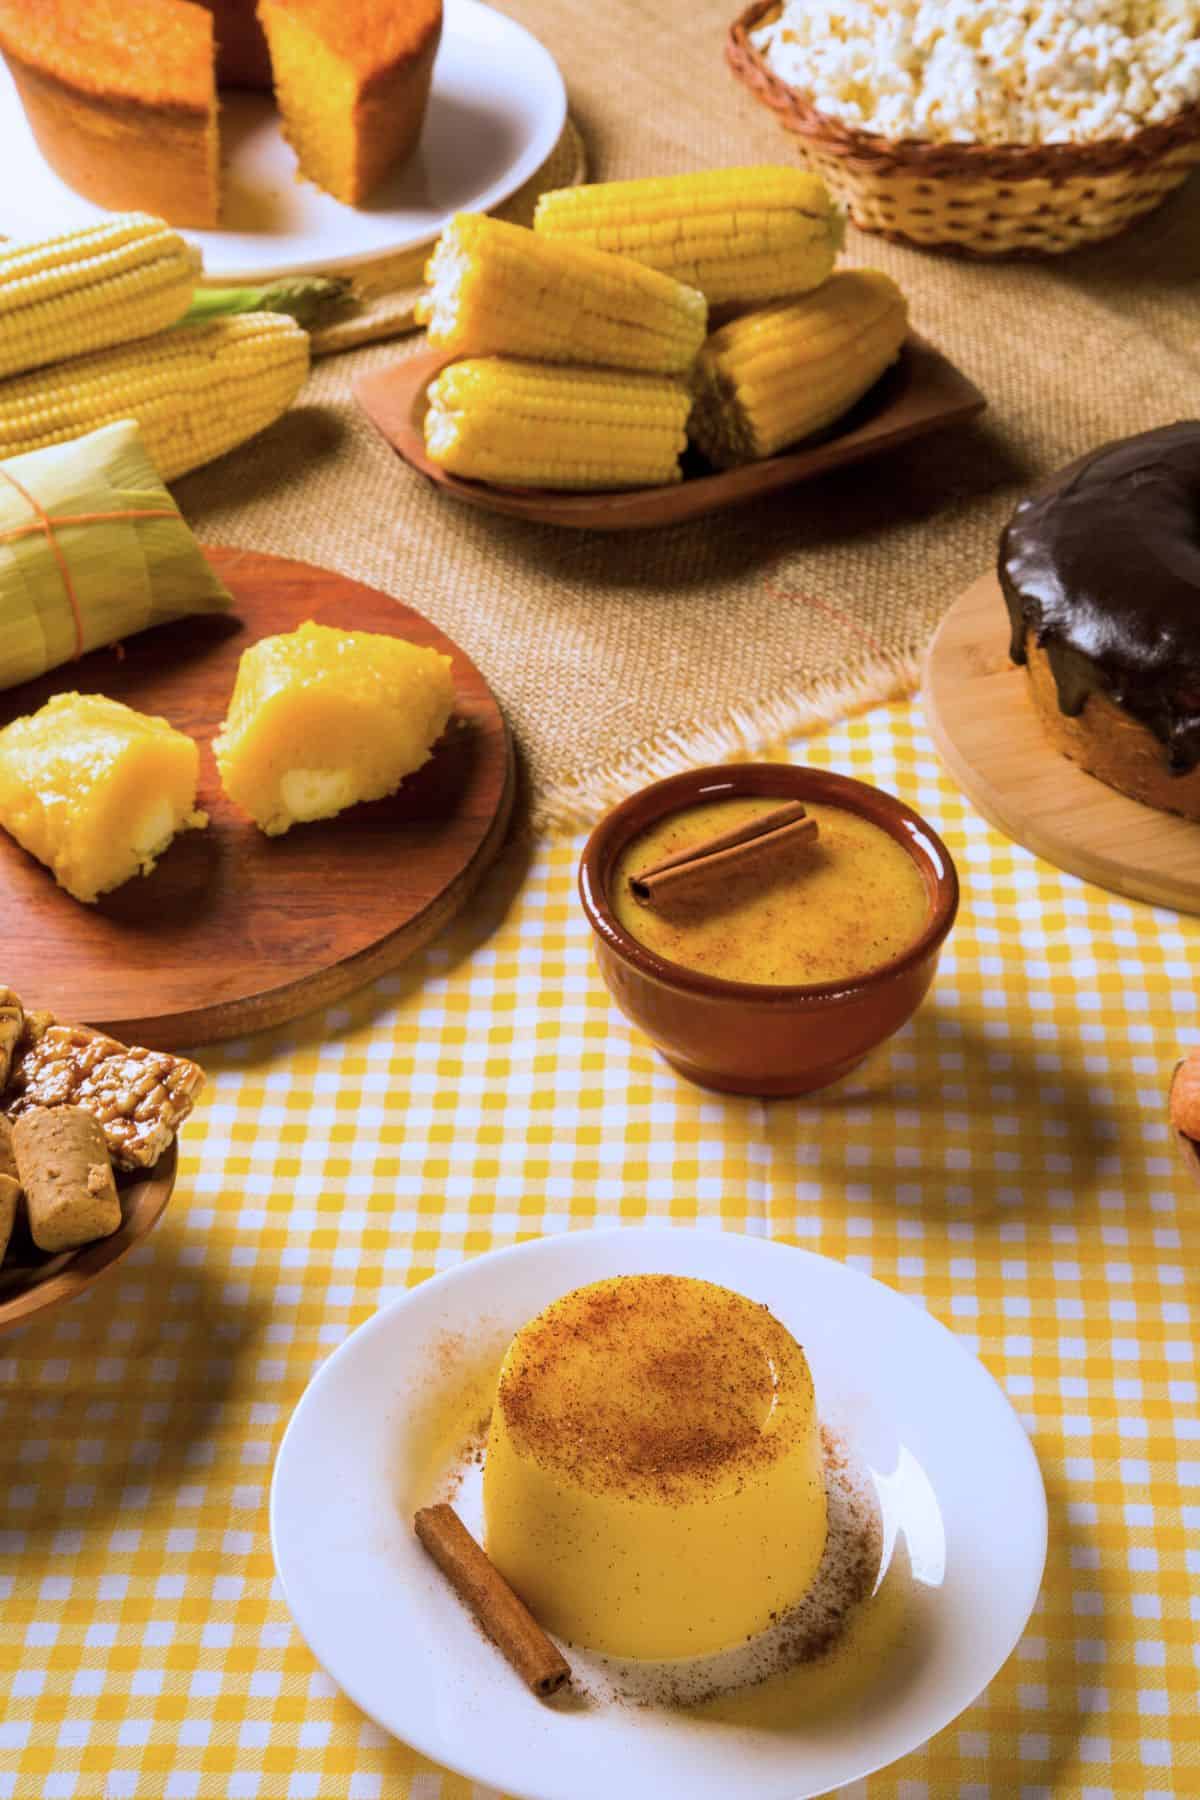 Colombian desserts